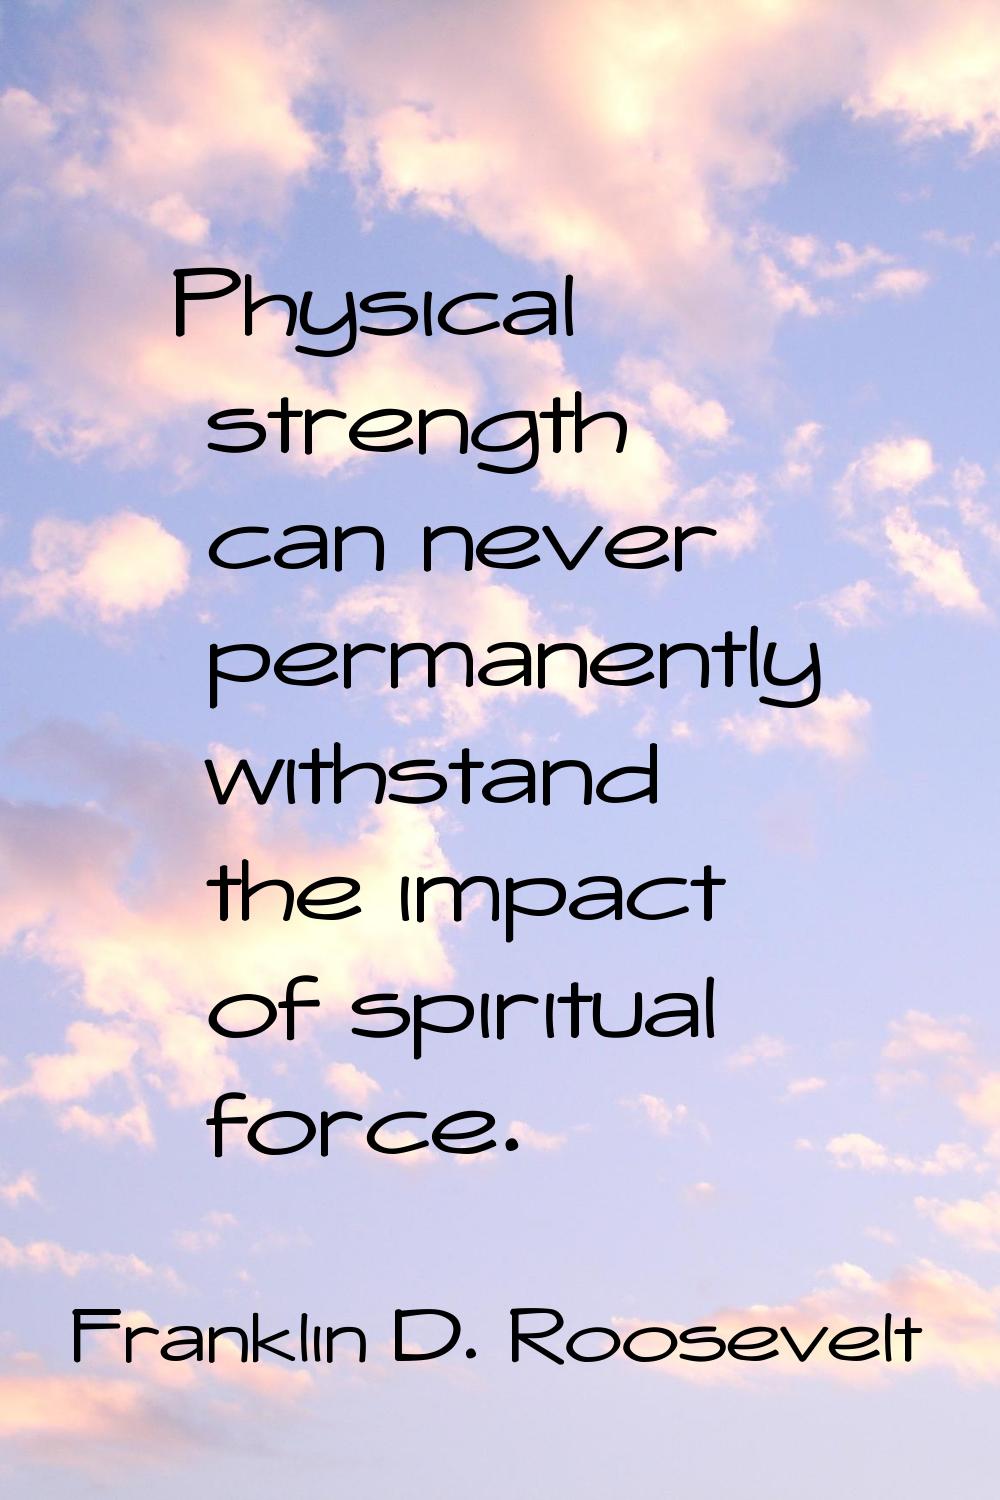 Physical strength can never permanently withstand the impact of spiritual force.